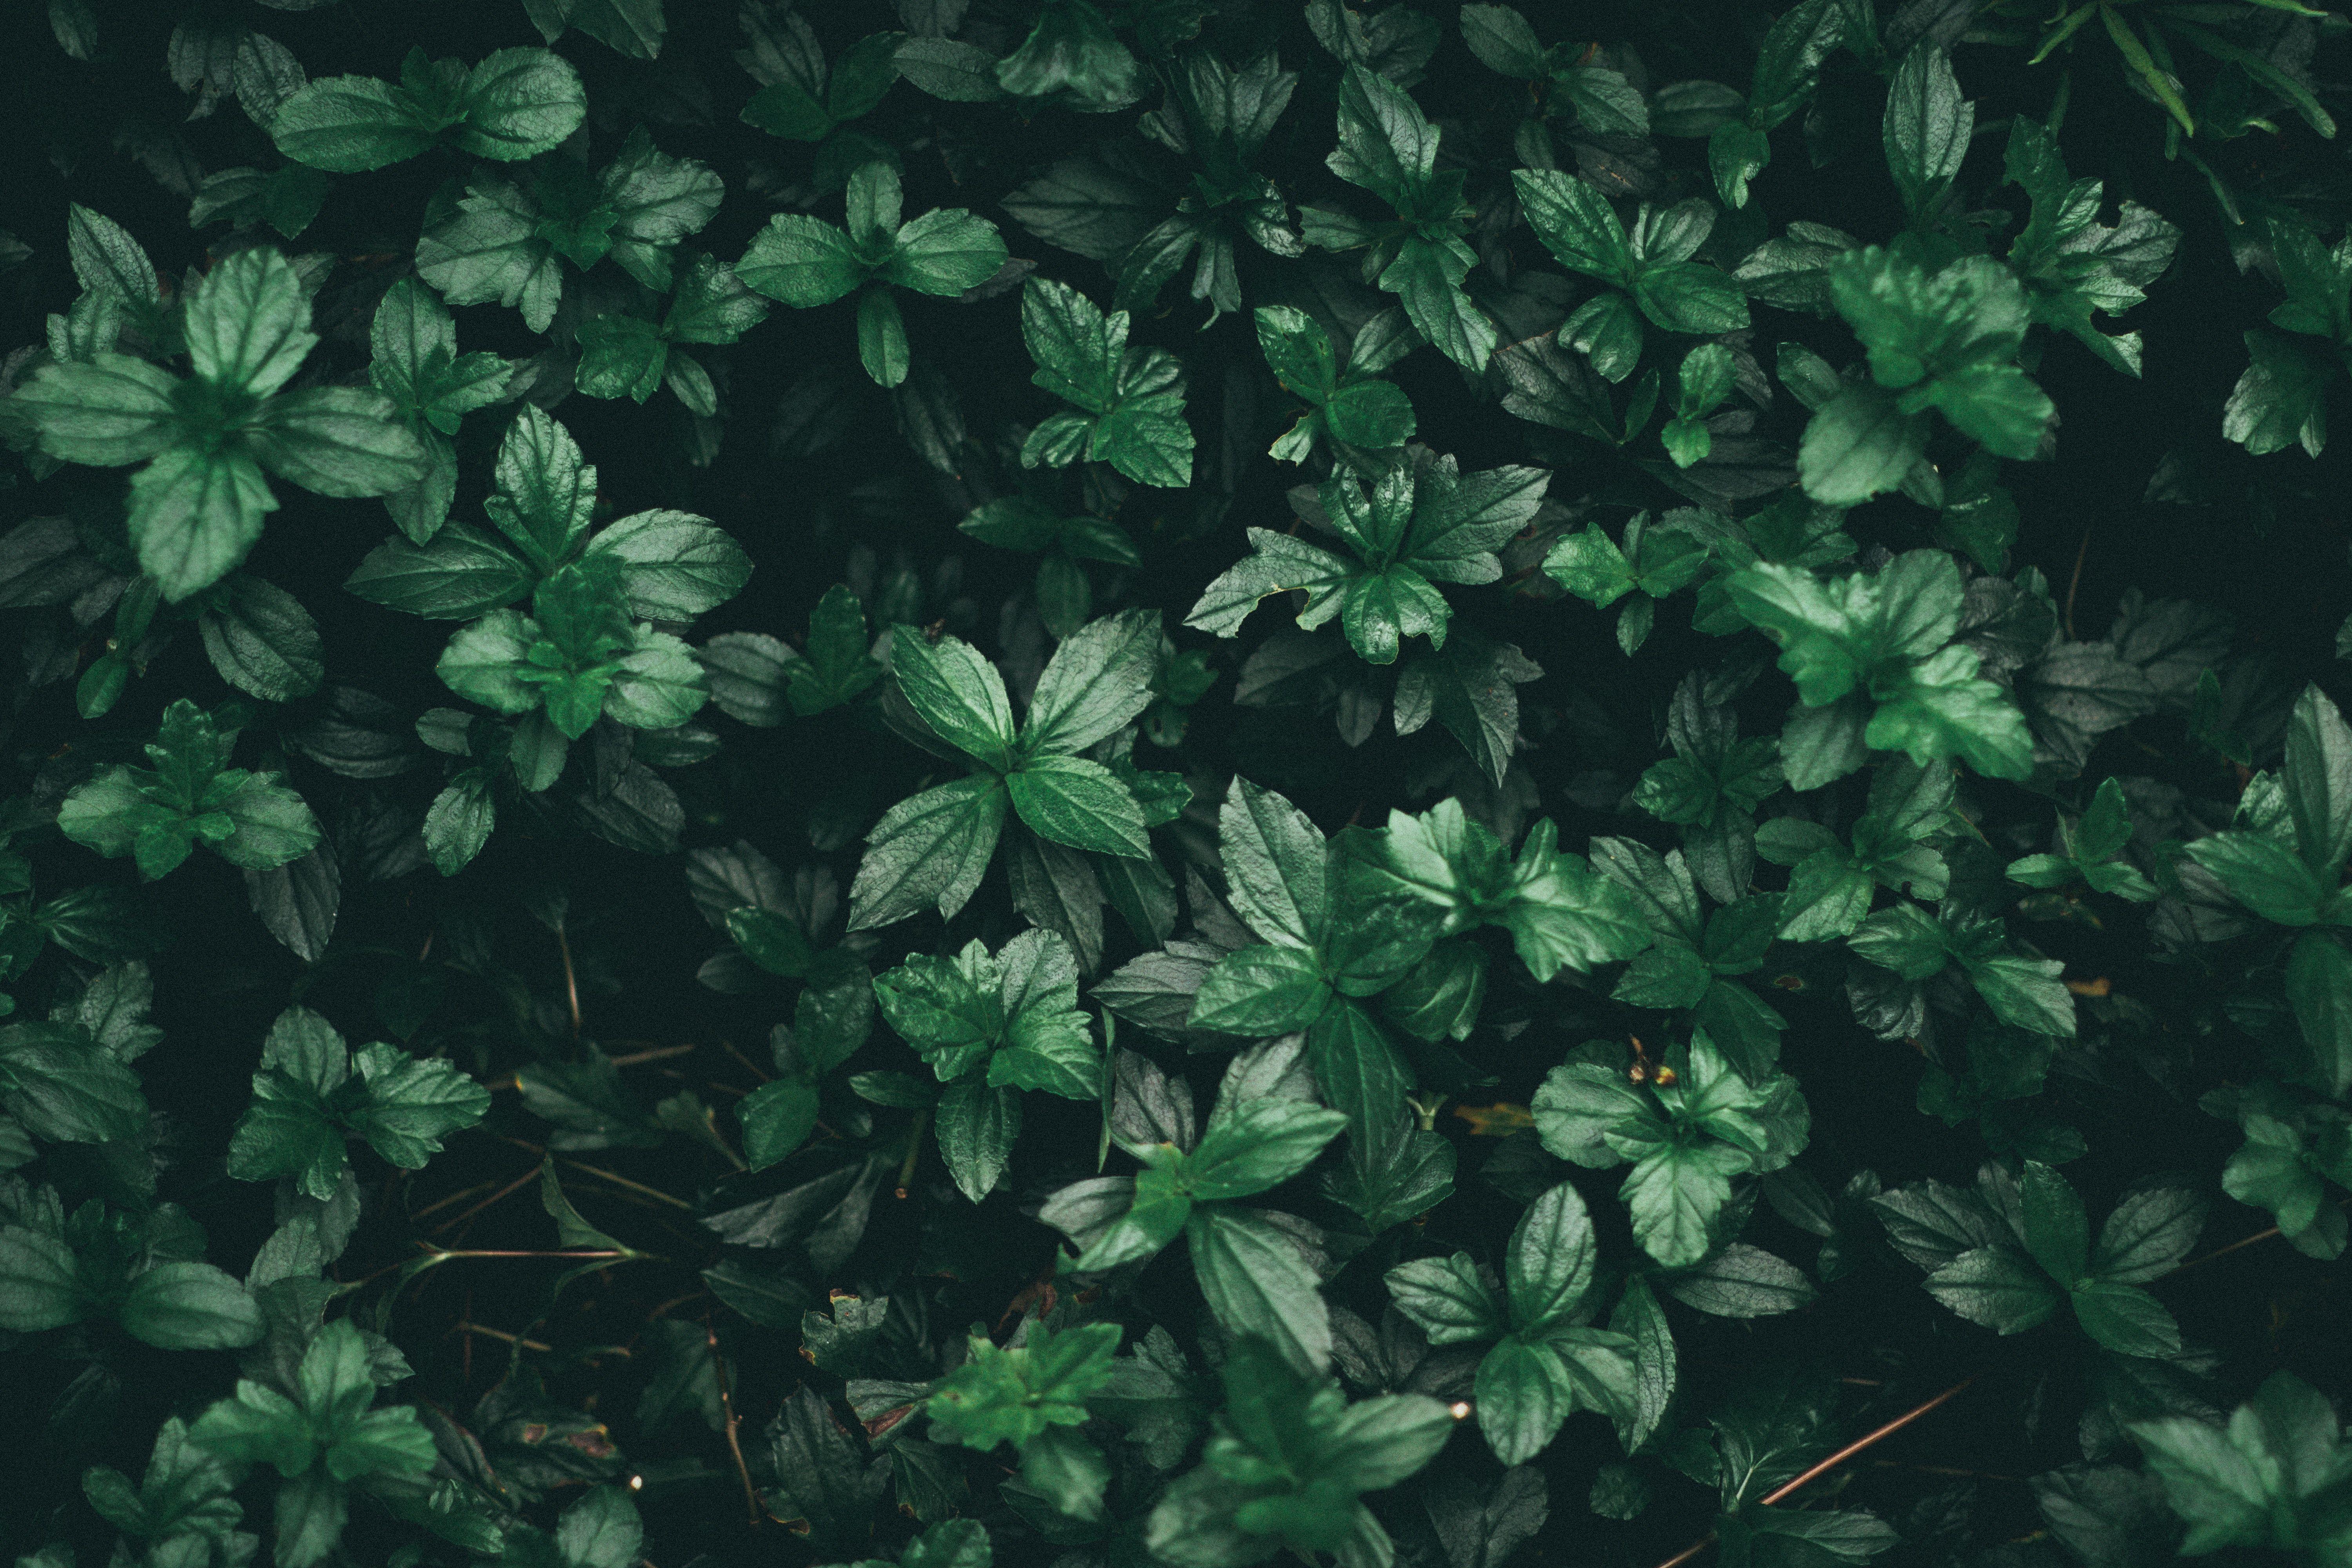 Green Aesthetic Computer Wallpapers - Top Free Green Aesthetic Computer